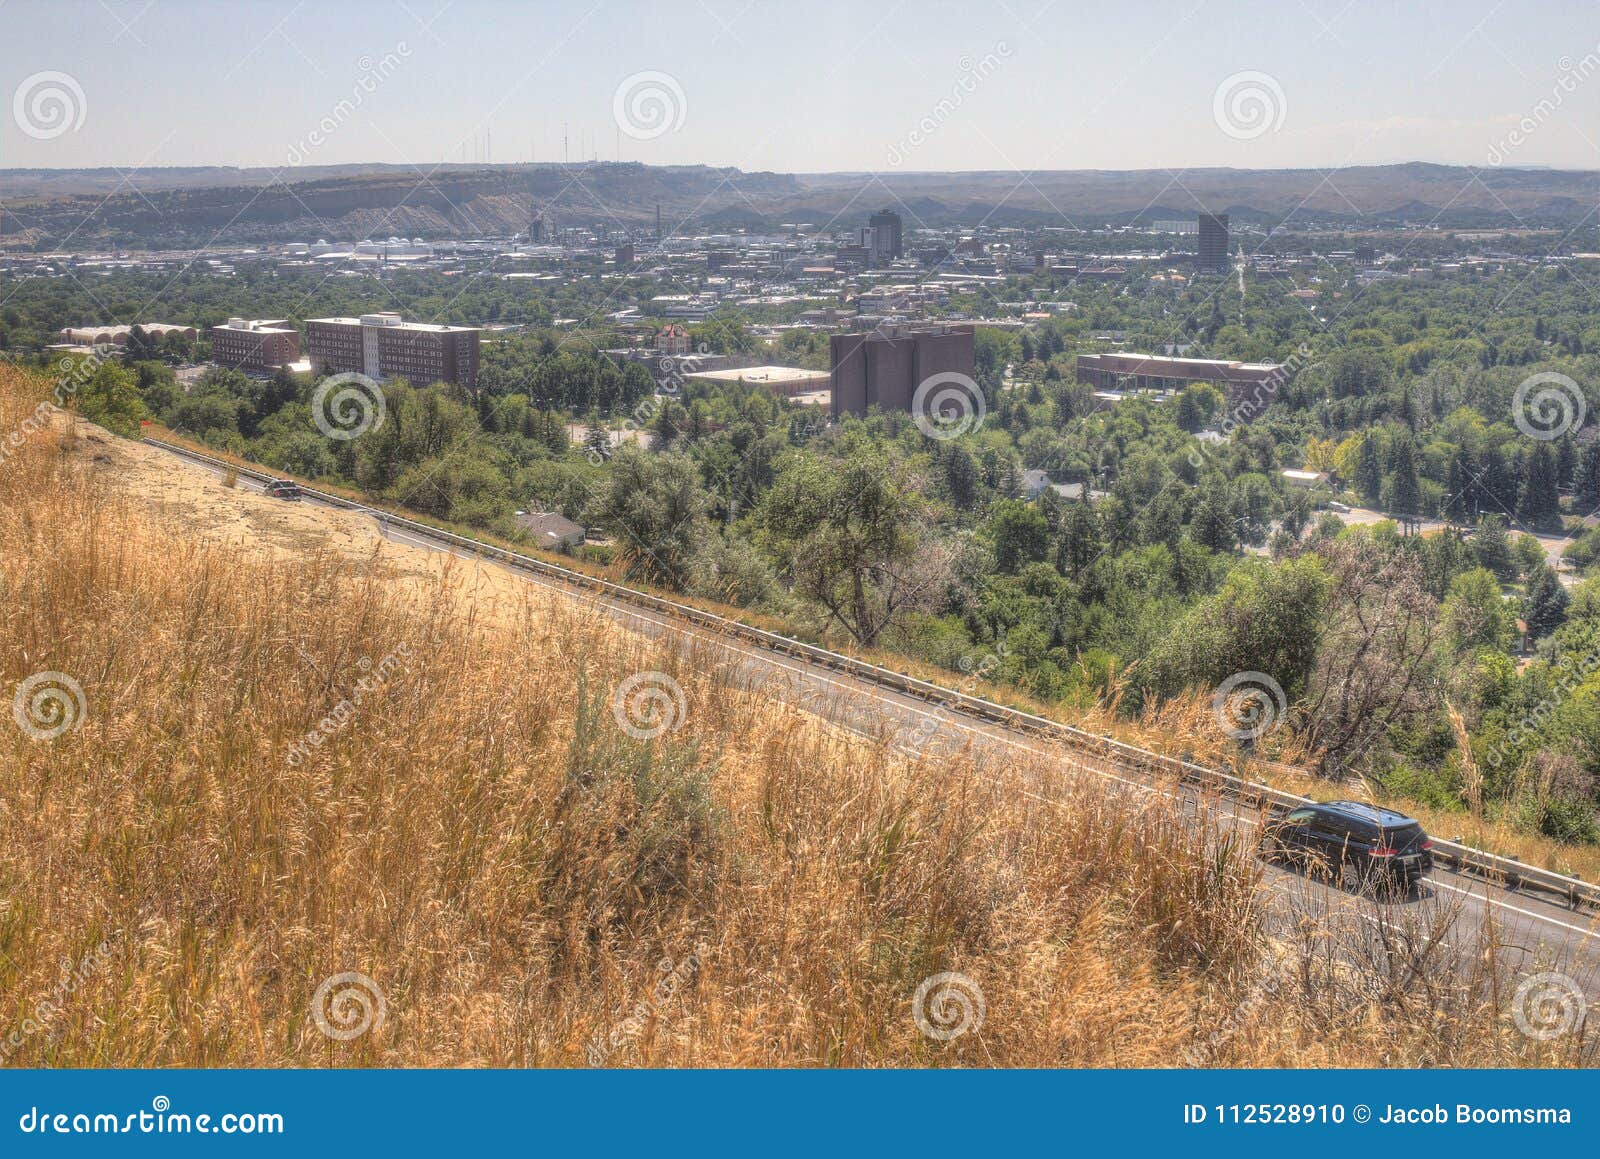 billings, montana as seen from above in summer